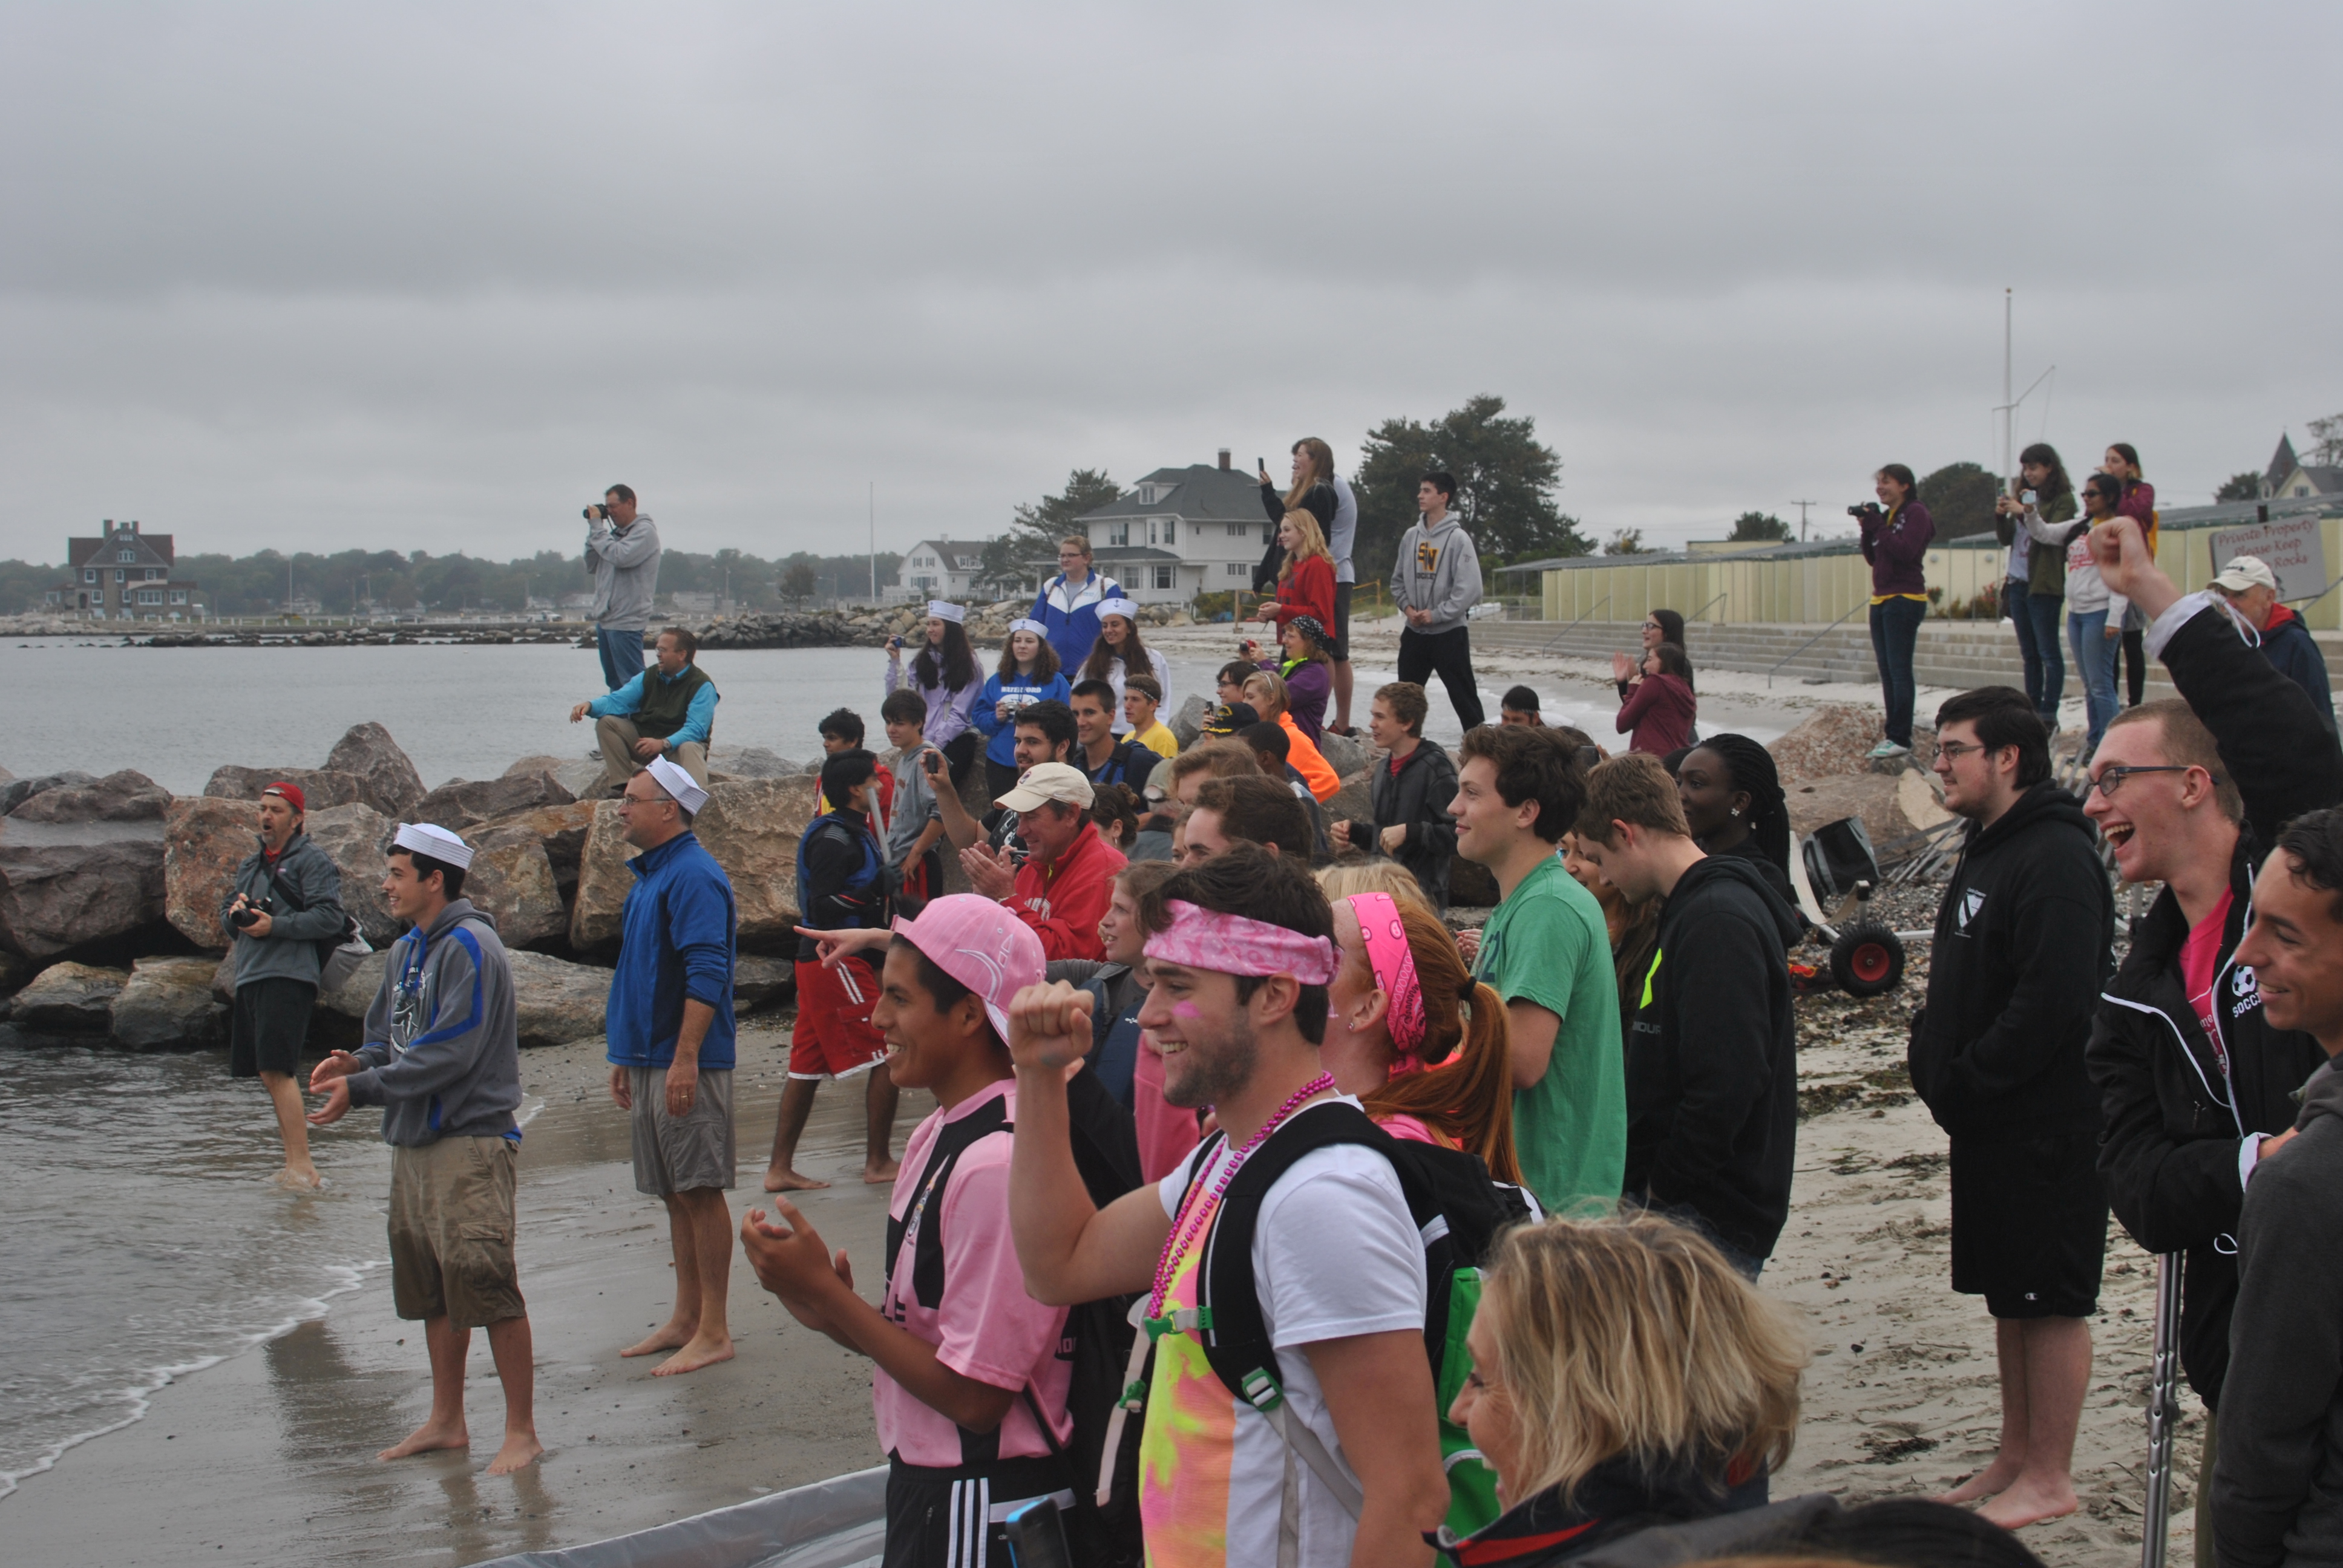 The crowd watching the cardboard boat race